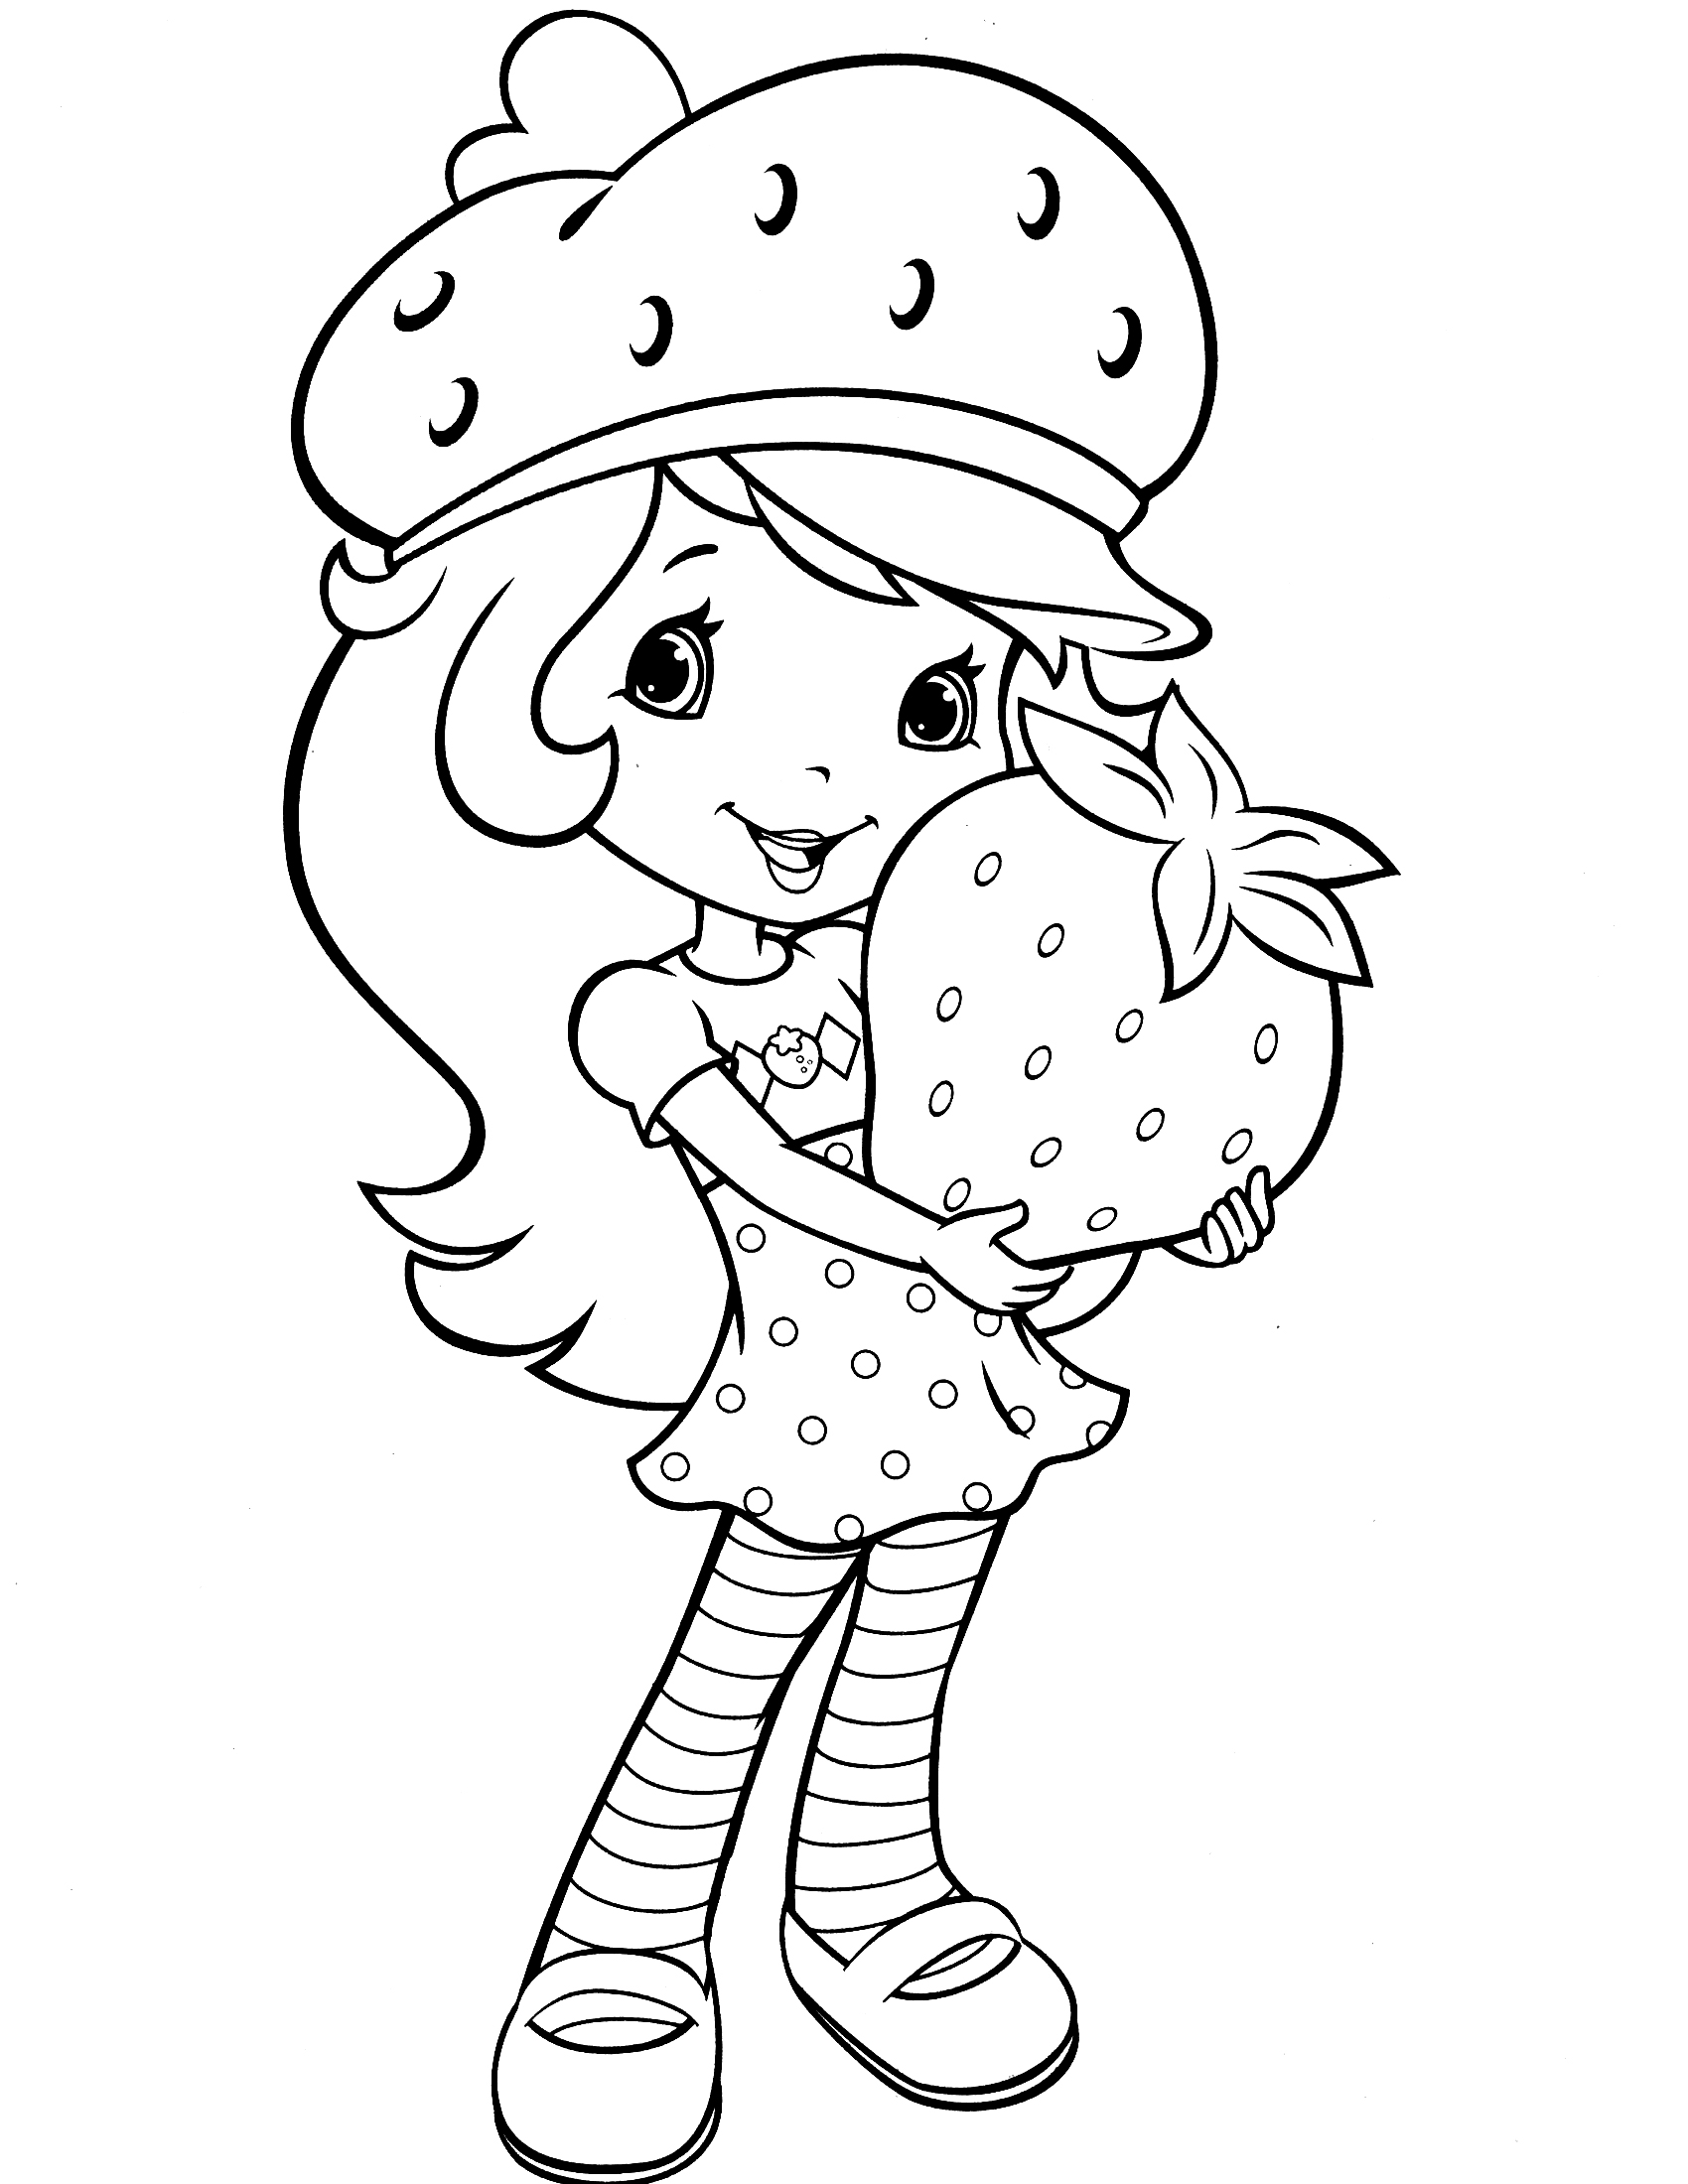 strawberry shortcake colouring pages to print strawberry shortcake coloring pages coloring pages for kids colouring strawberry to print shortcake pages 